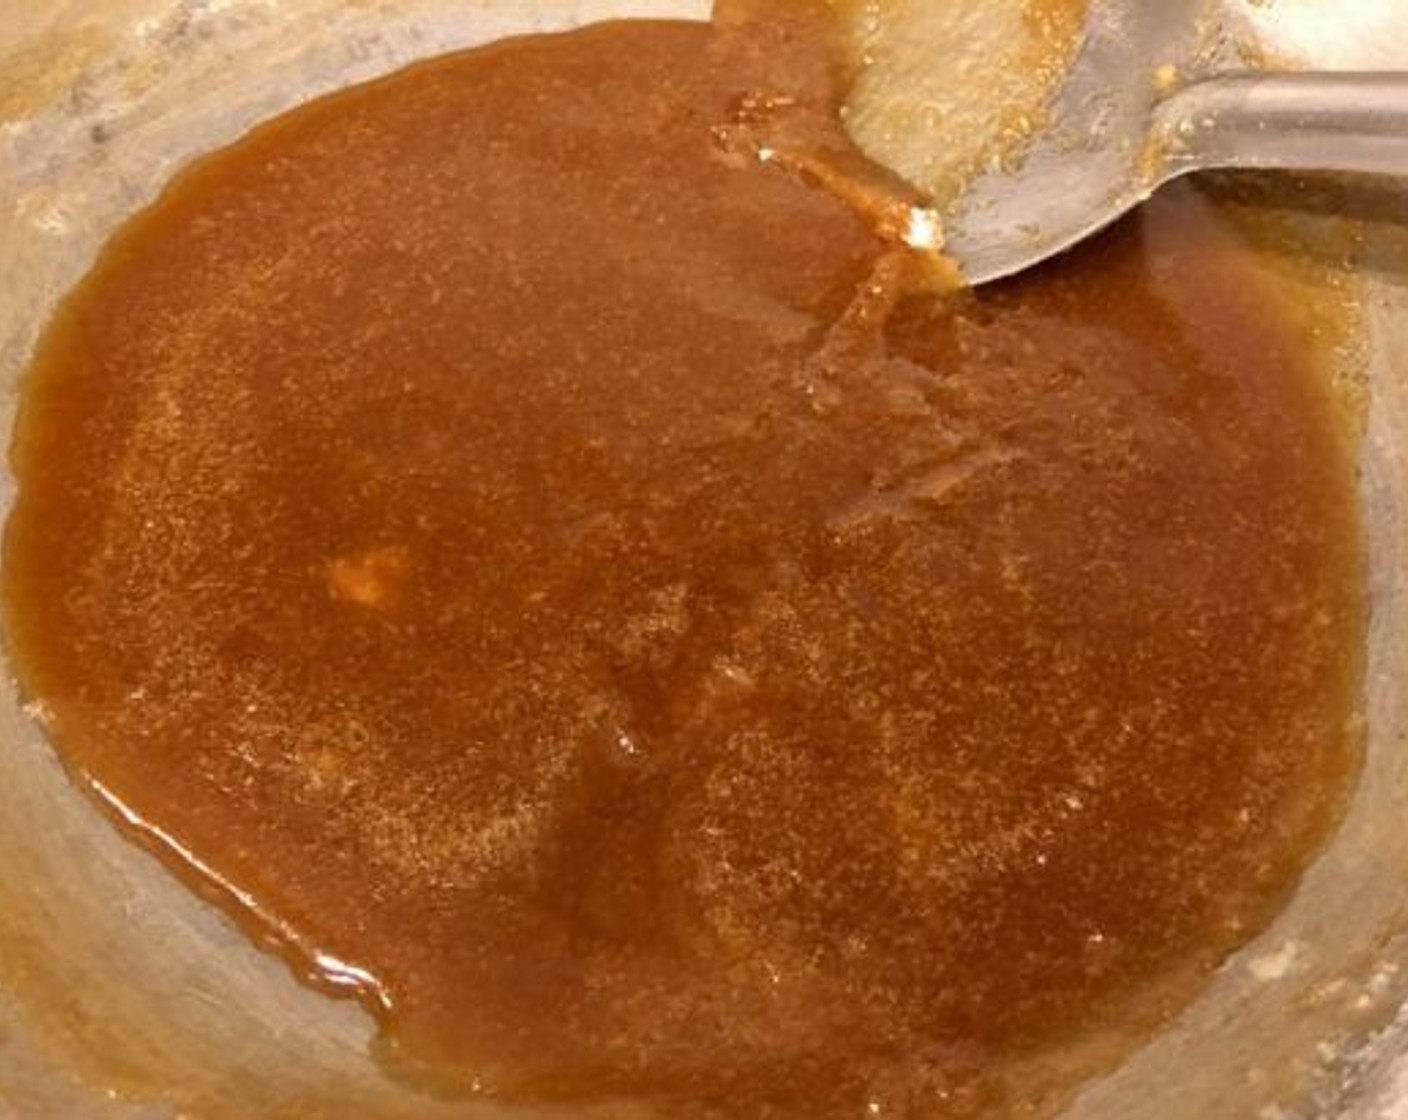 step 2 On medium heat add Brown Sugar (1 1/4 cups) and Water (1 1/2 cups) to a pan. Let it cook for 10-15 minutes until it gets really thick, almost ready to crystallize again.